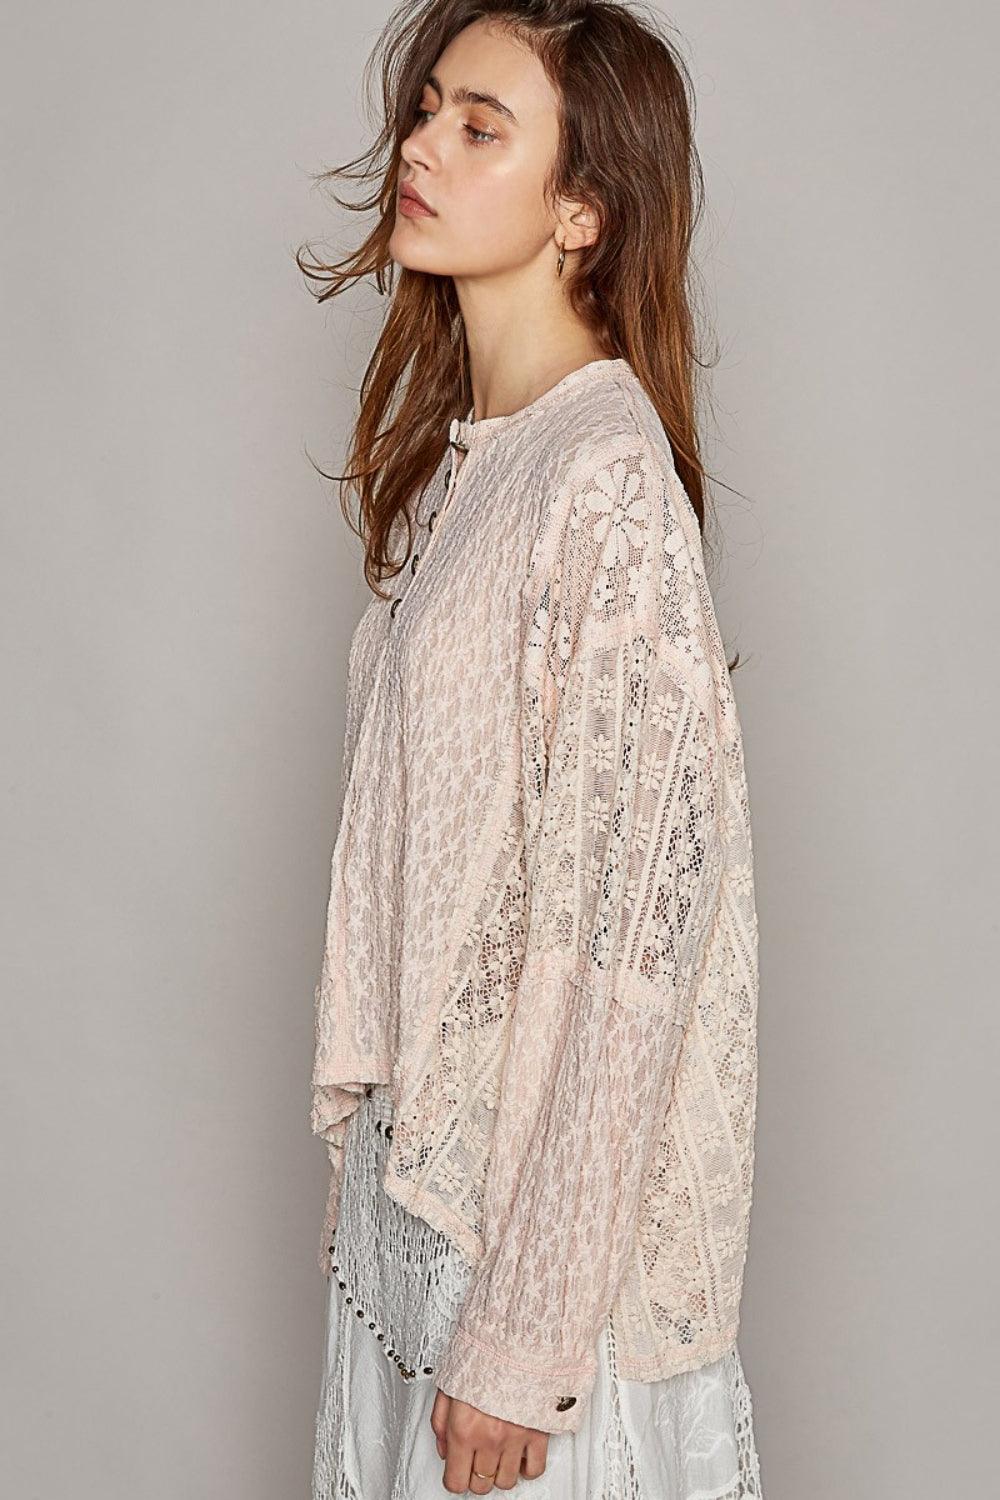 Women's Shirts POL Round Neck Long Sleeve Raw Edge Lace Top